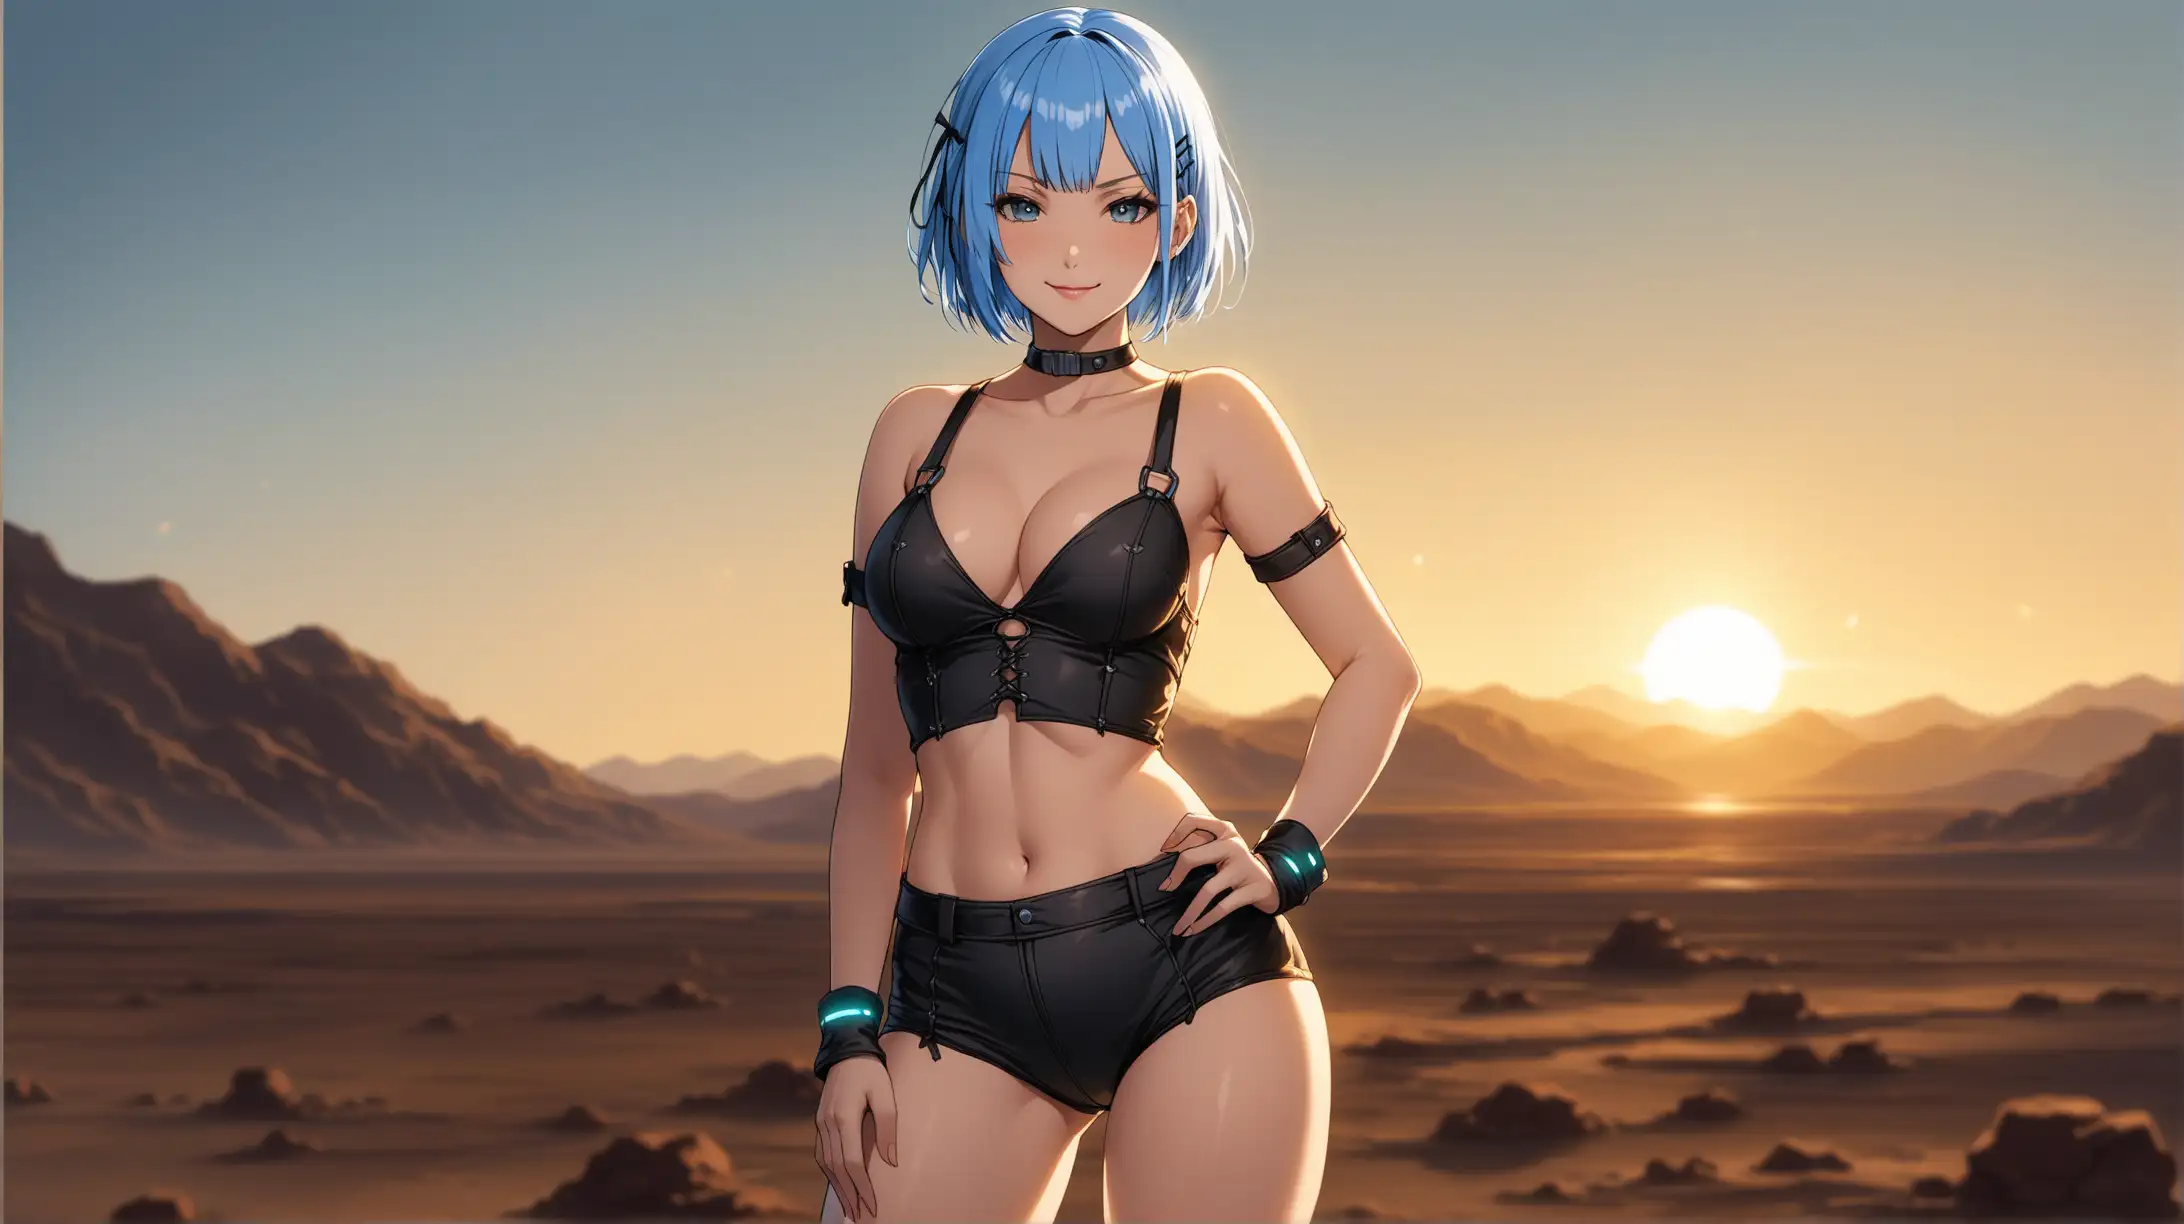 Draw the character Rem, high quality, outdoors, soft lighting, cowboy shot, in a seductive pose, wearing an outfit inspired by the Fallout series, smiling at the viewer